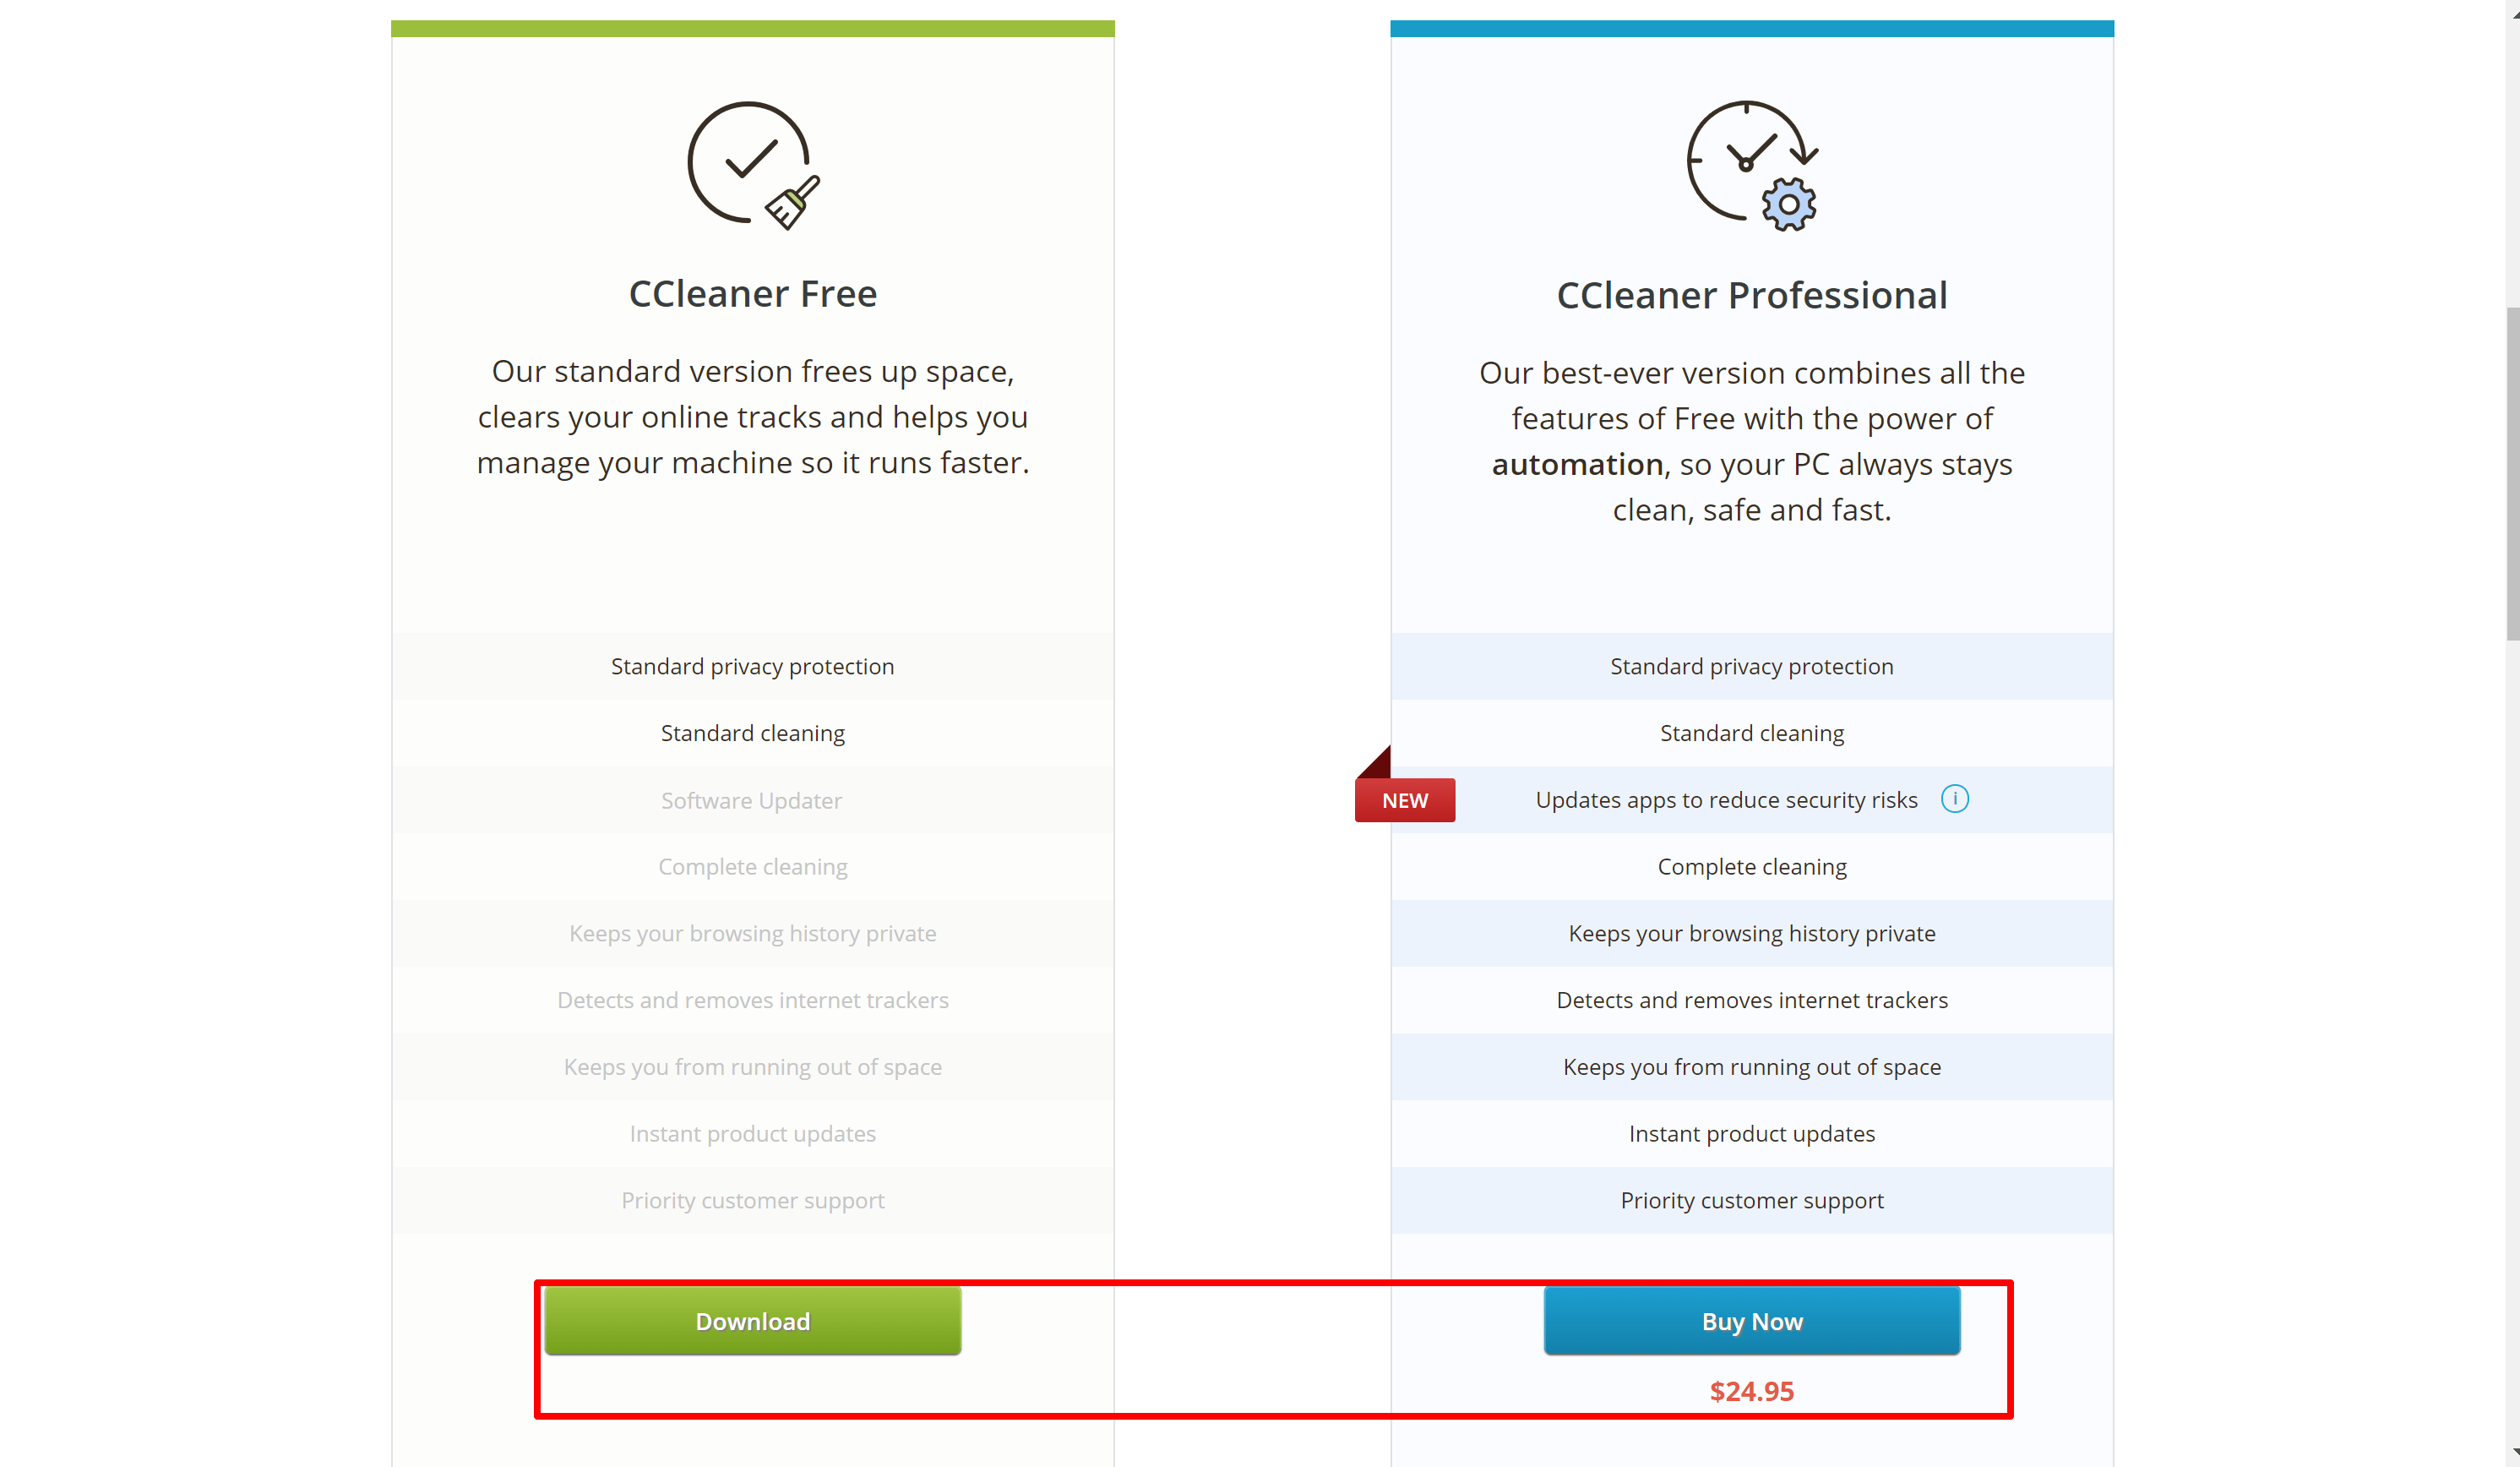 CCleaner Professional pricing plans